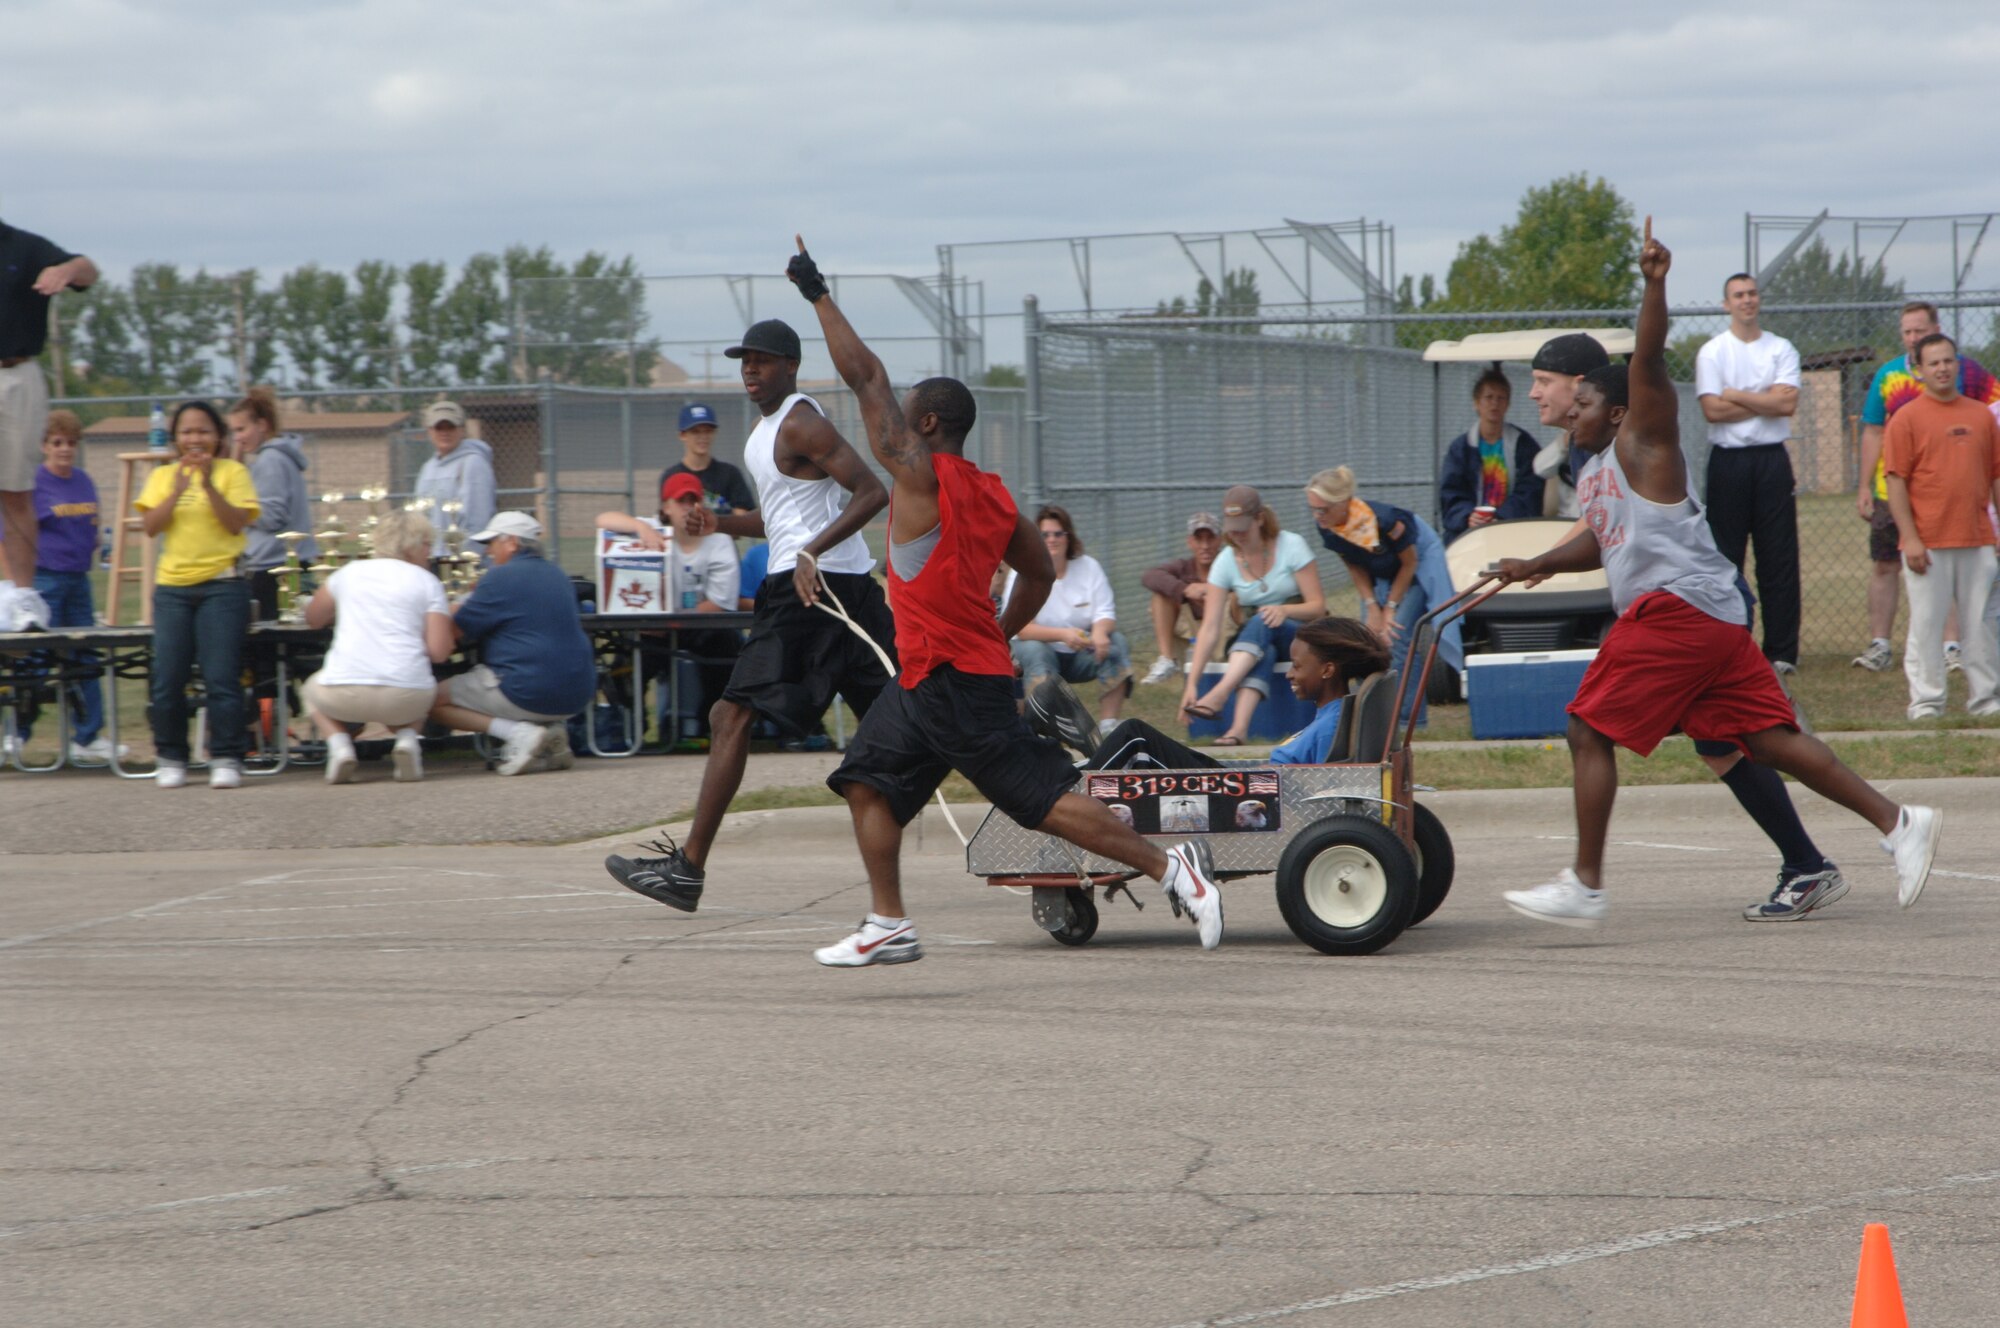 Members of the 319th Civil Engineers Squadron race to the finish line at the Bed Racing event during the Grand Forks Air Force Base Summer Bash on Aug. 23. The base personnel and family members participated in several sports including basketball, bowling and horse shoes.   (U.S. Air Force photo/Airman 1st Class Chad M. Kellum)